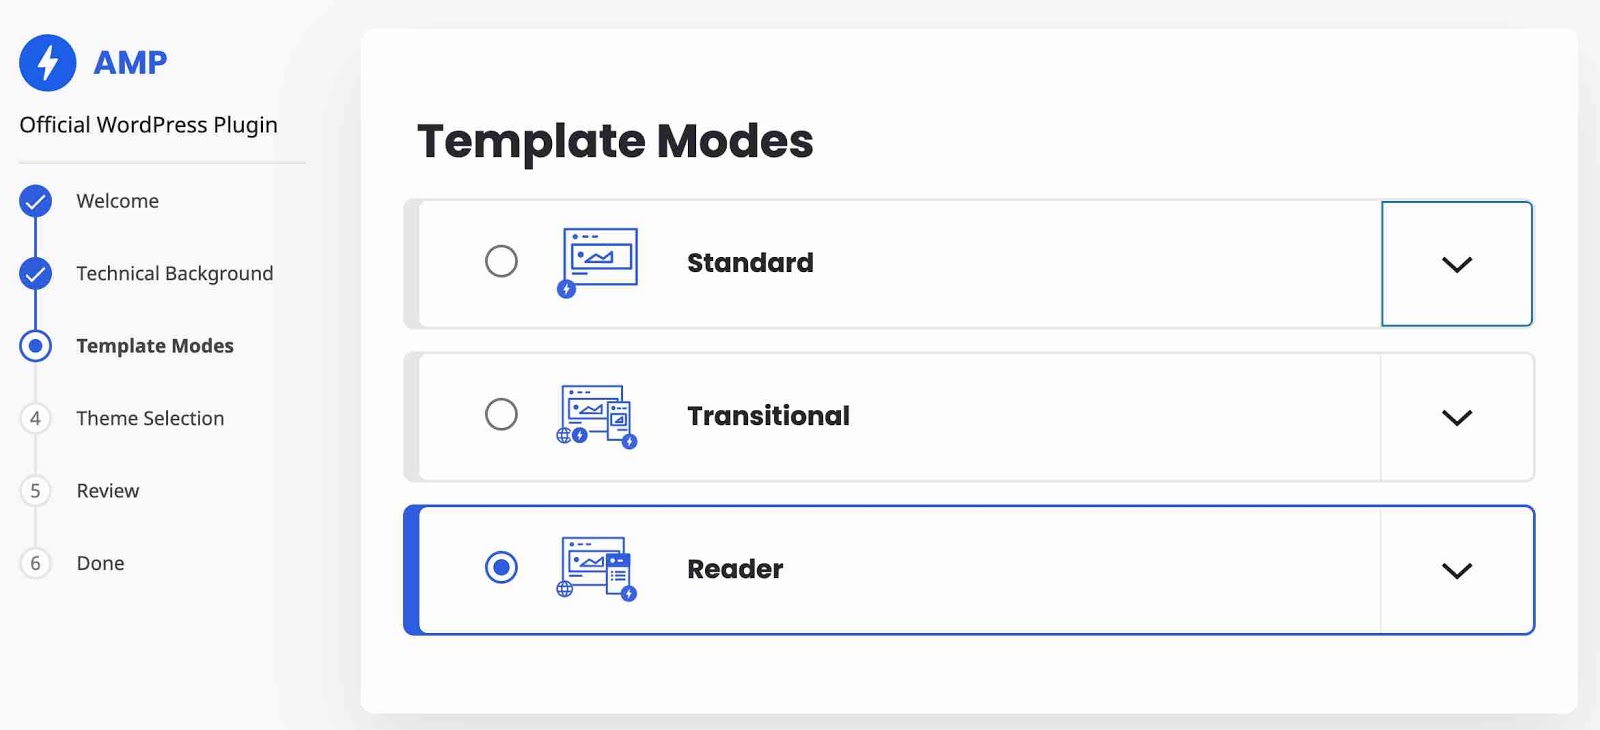 AMP template modes settings